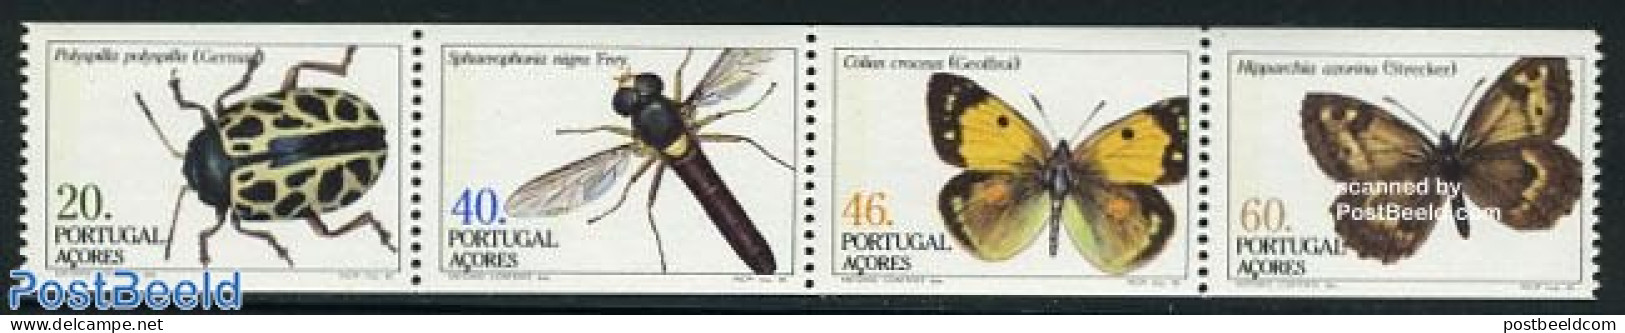 Azores 1985 Insects From Booklet 4v, Mint NH, Nature - Butterflies - Insects - Azores